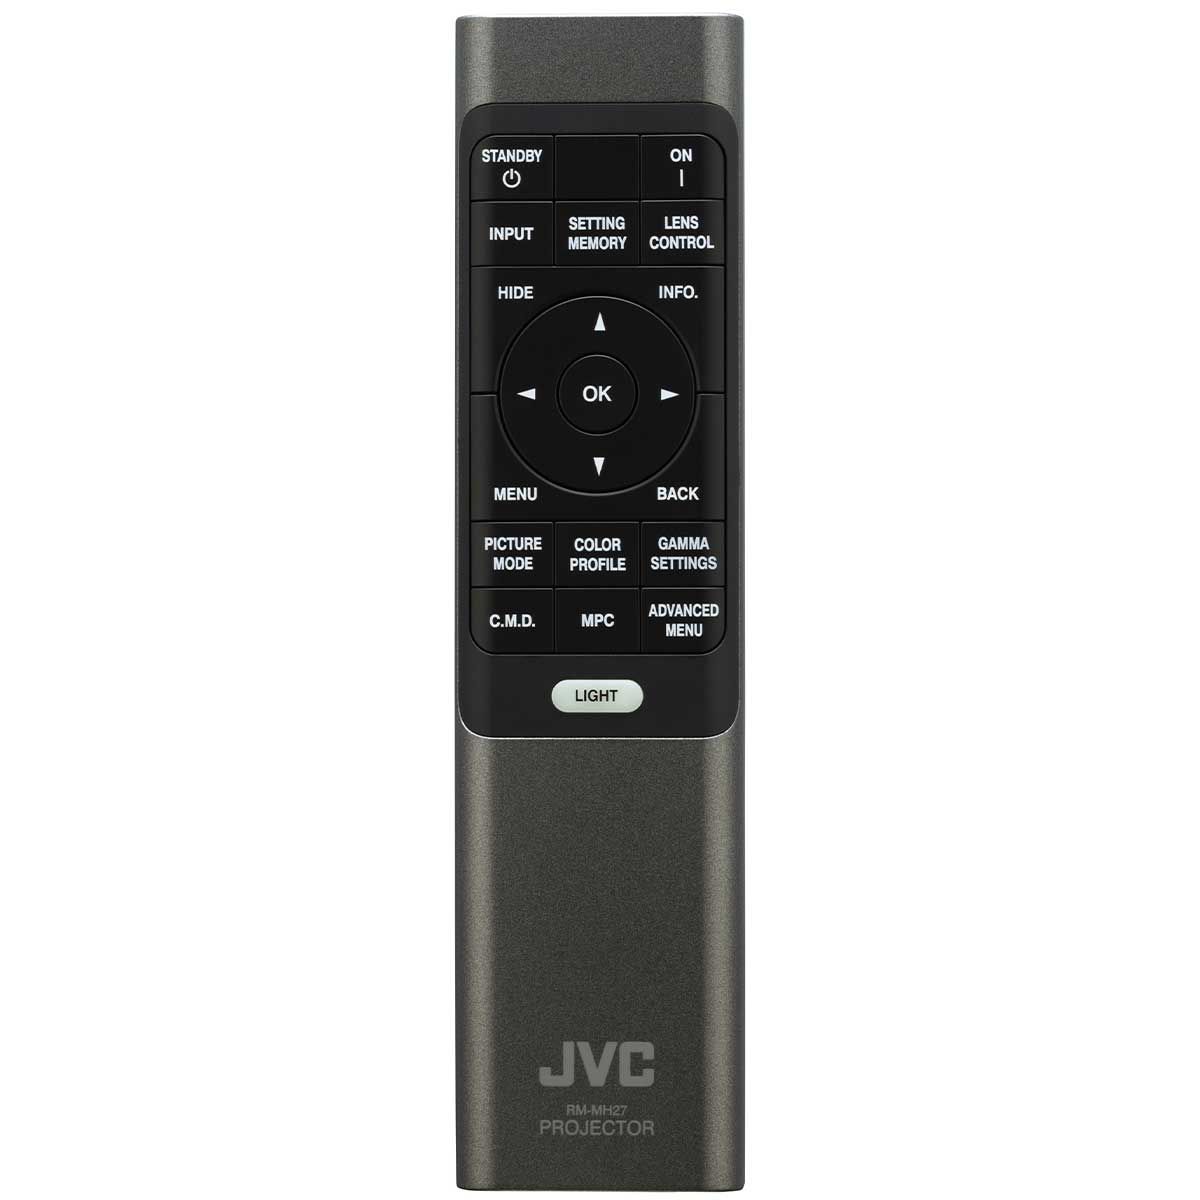 top view of remote control that comes with JVC DLA-NX9 projector 